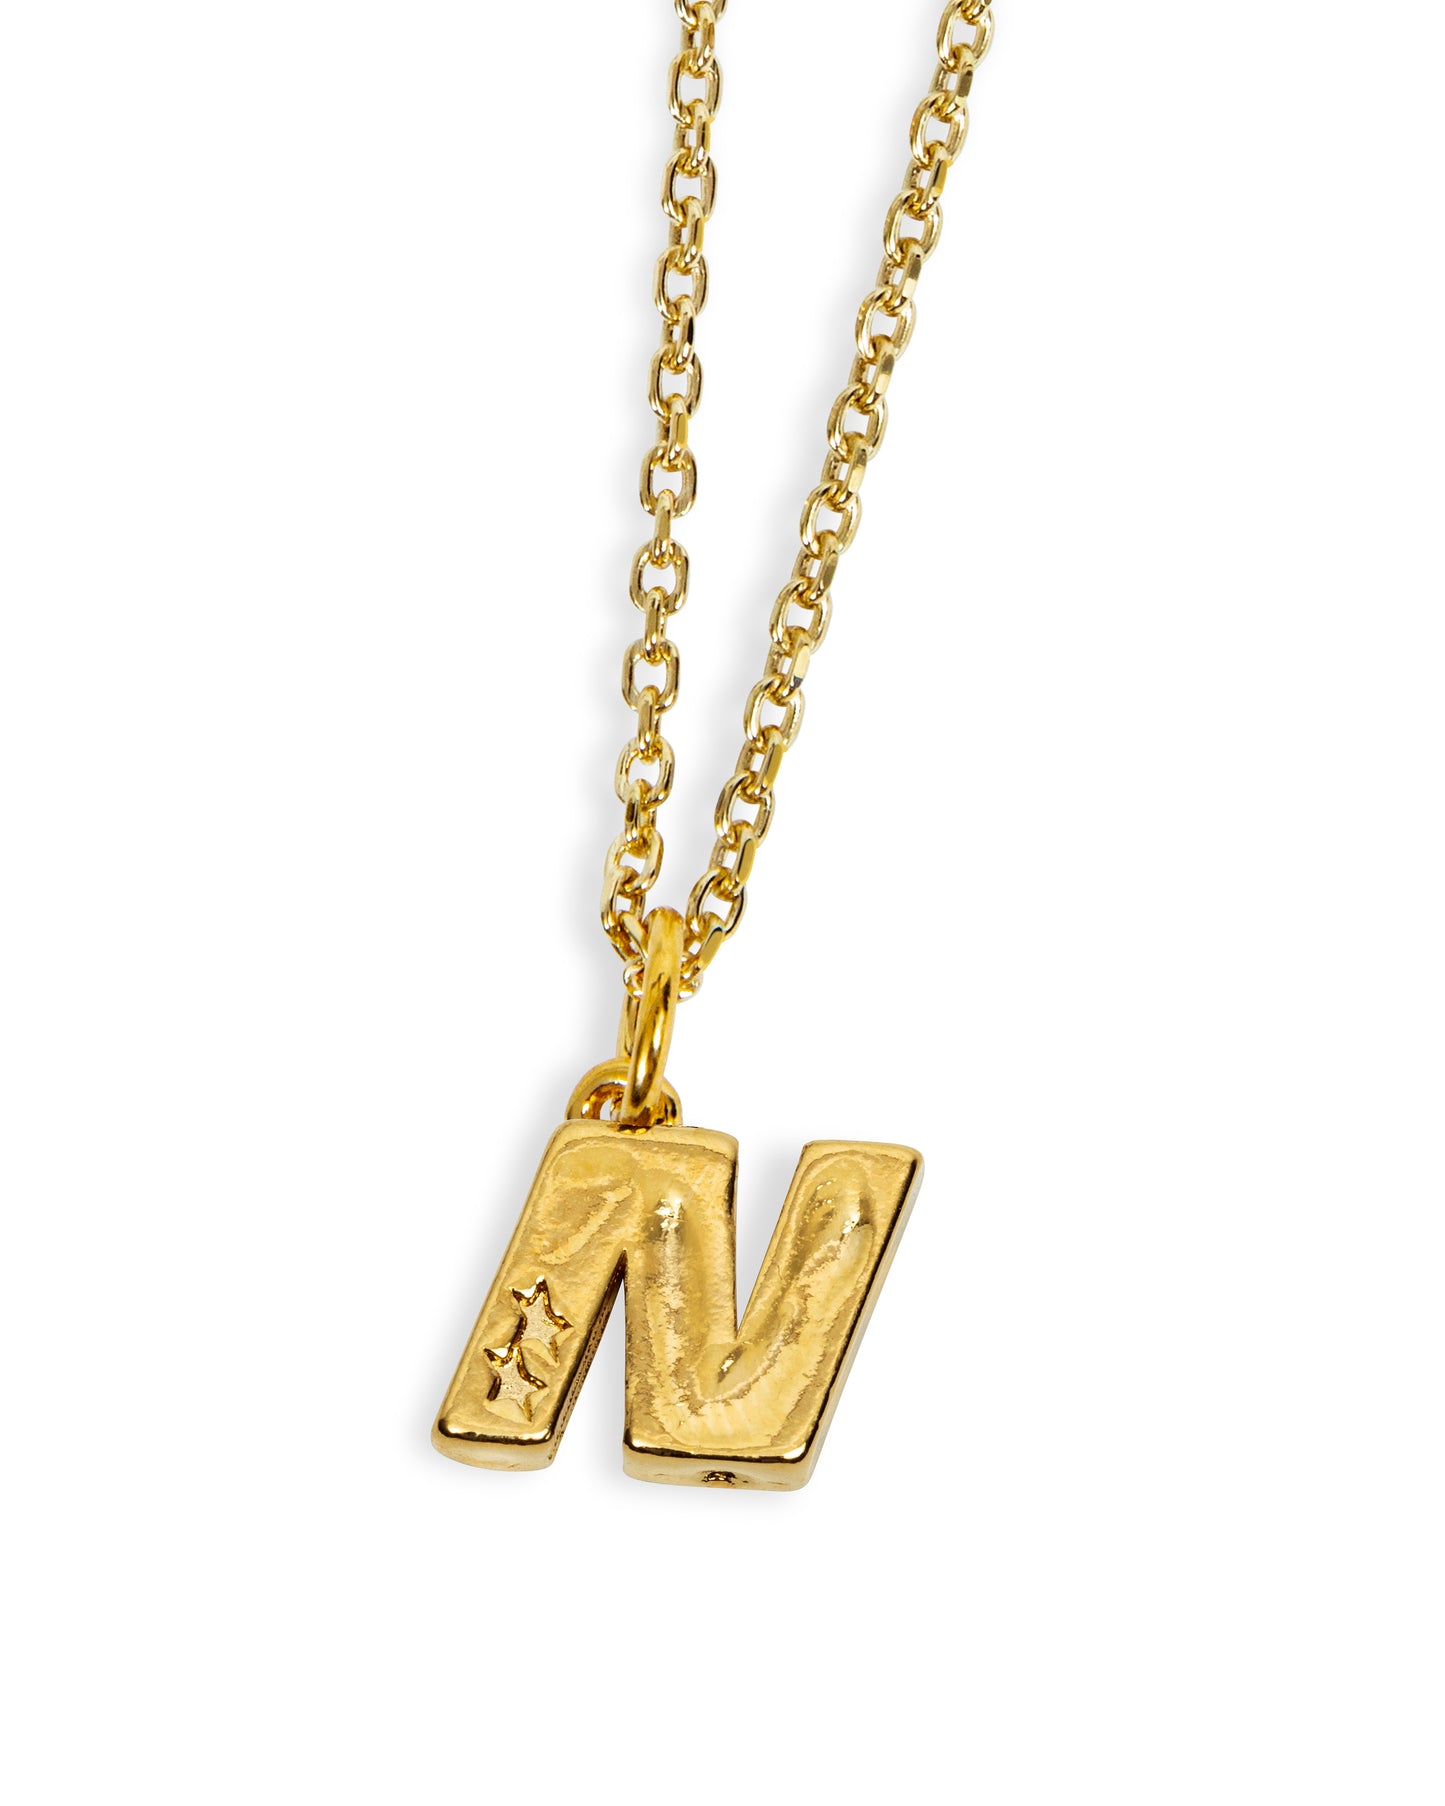 N Necklace